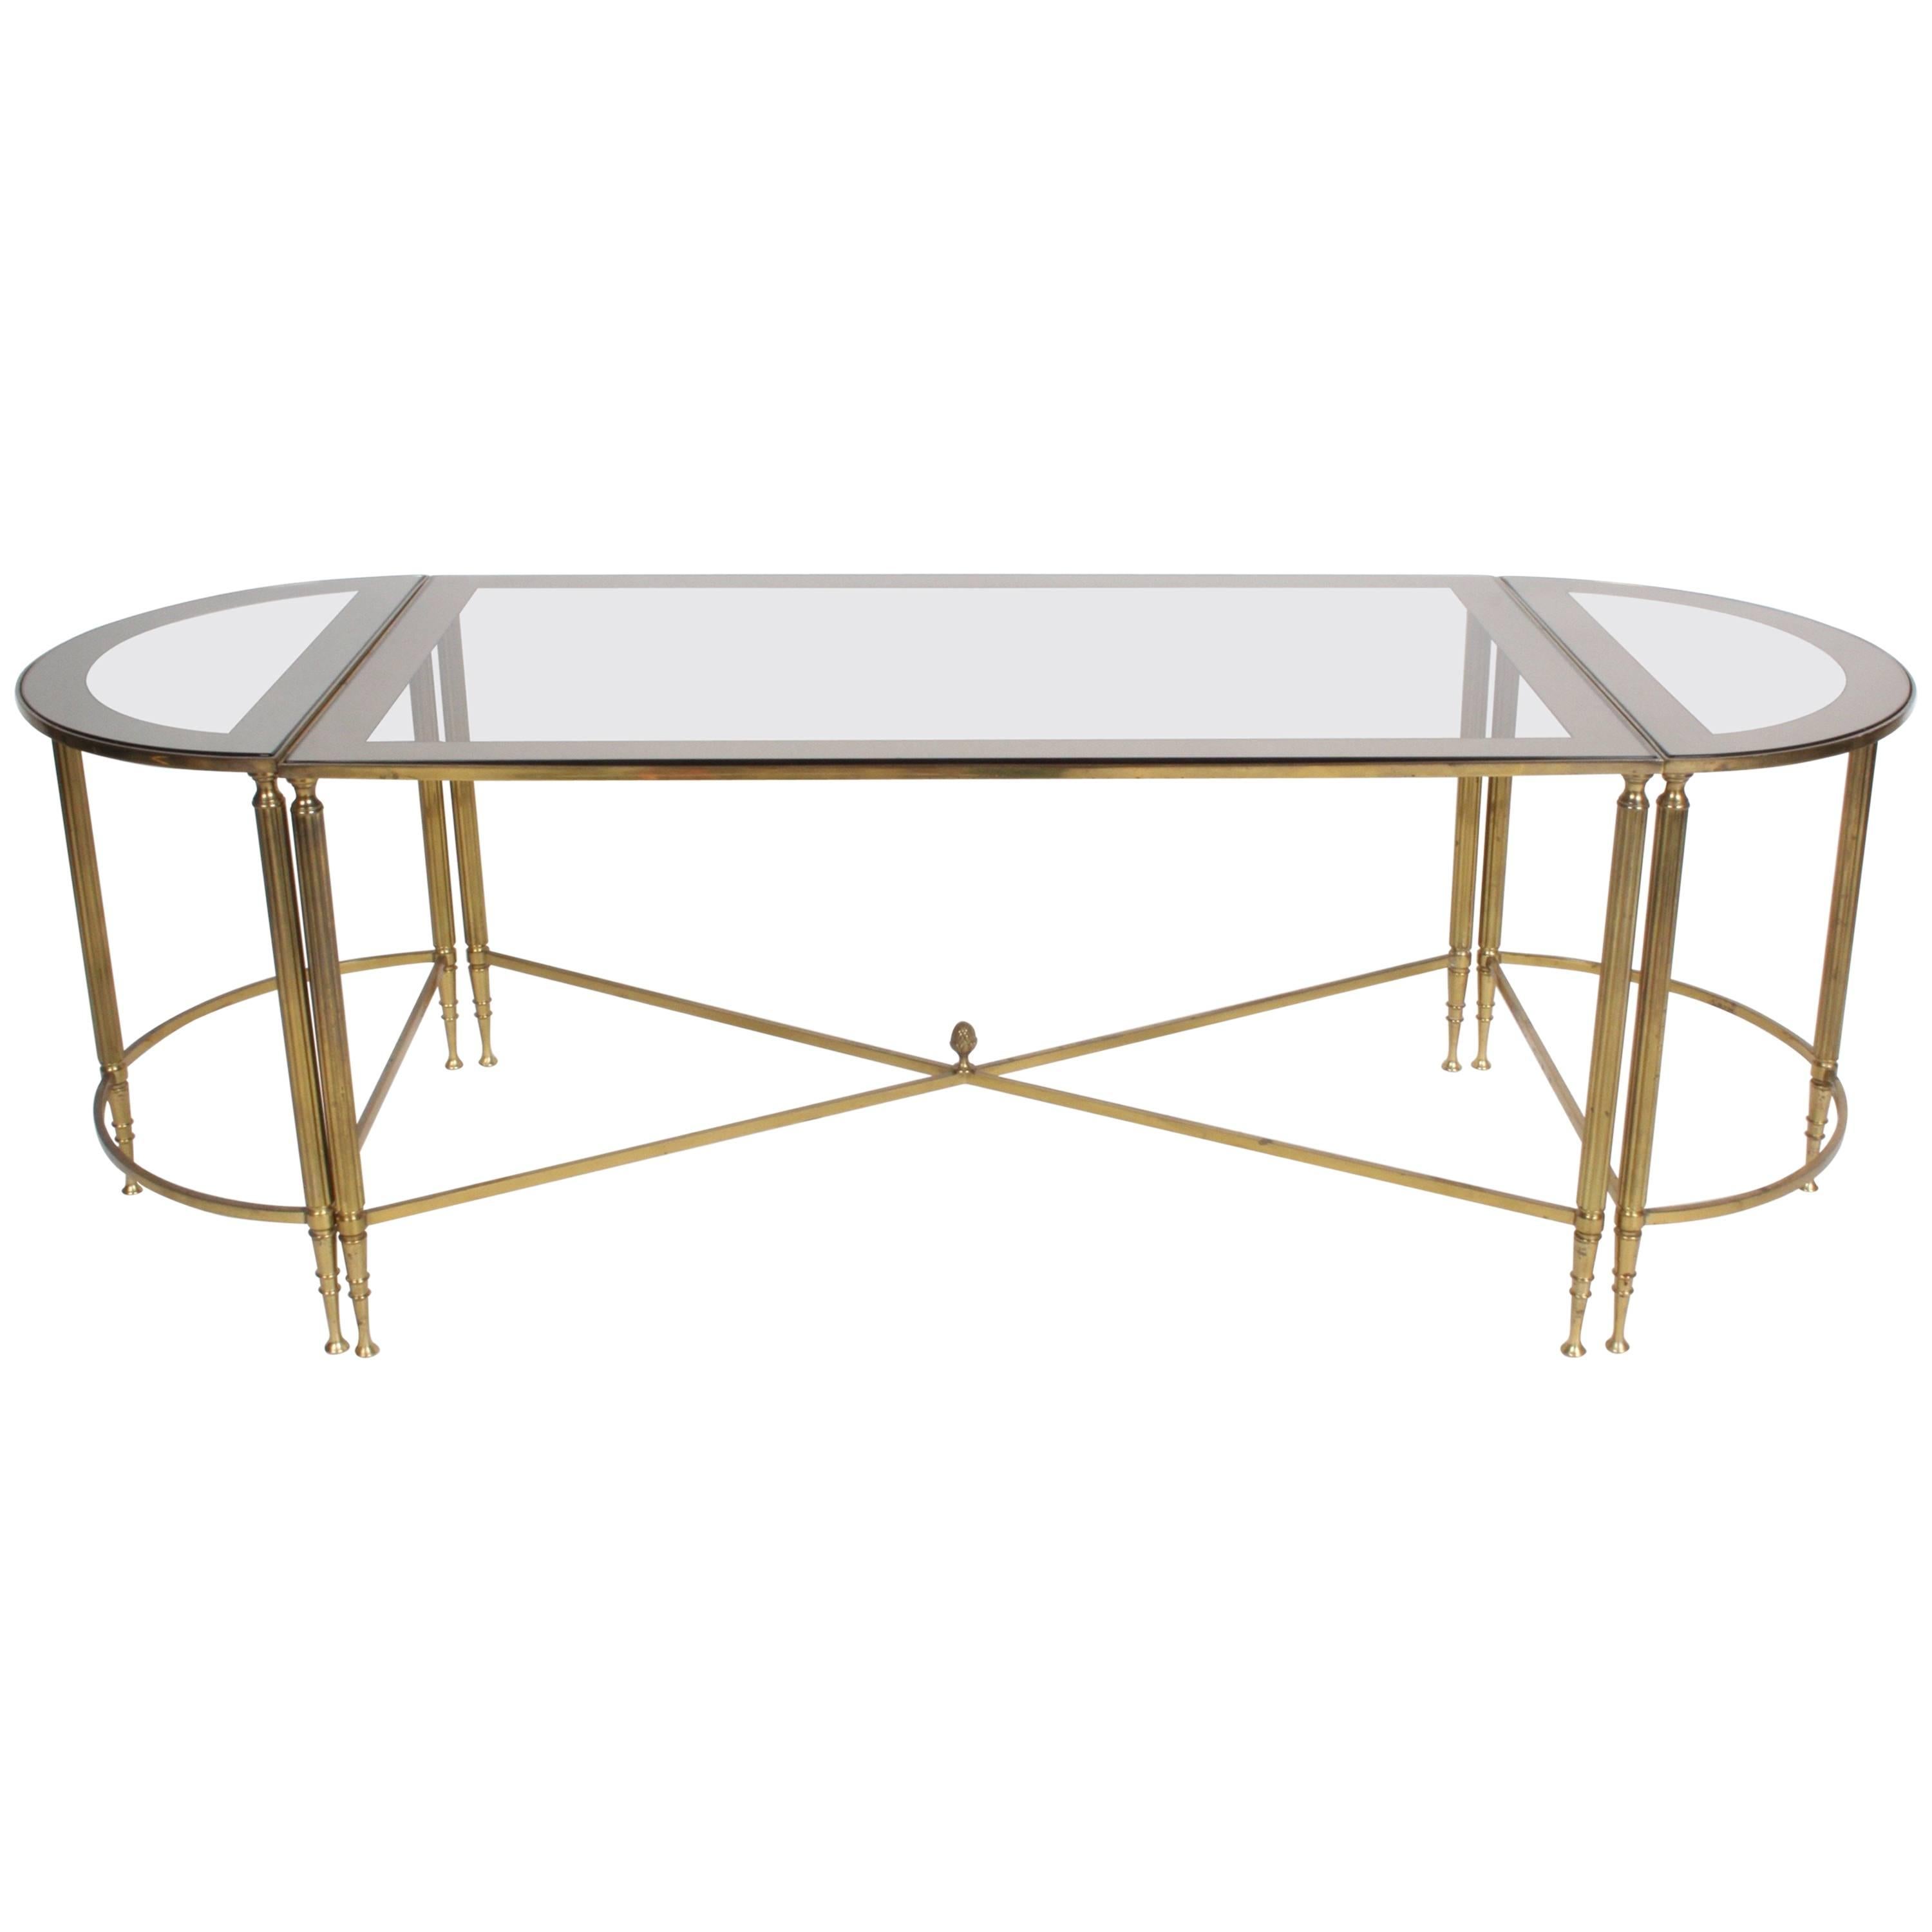 Maison Jansen Style Neo-classical Three-Piece Fluted Bronze Glass Coffee Table